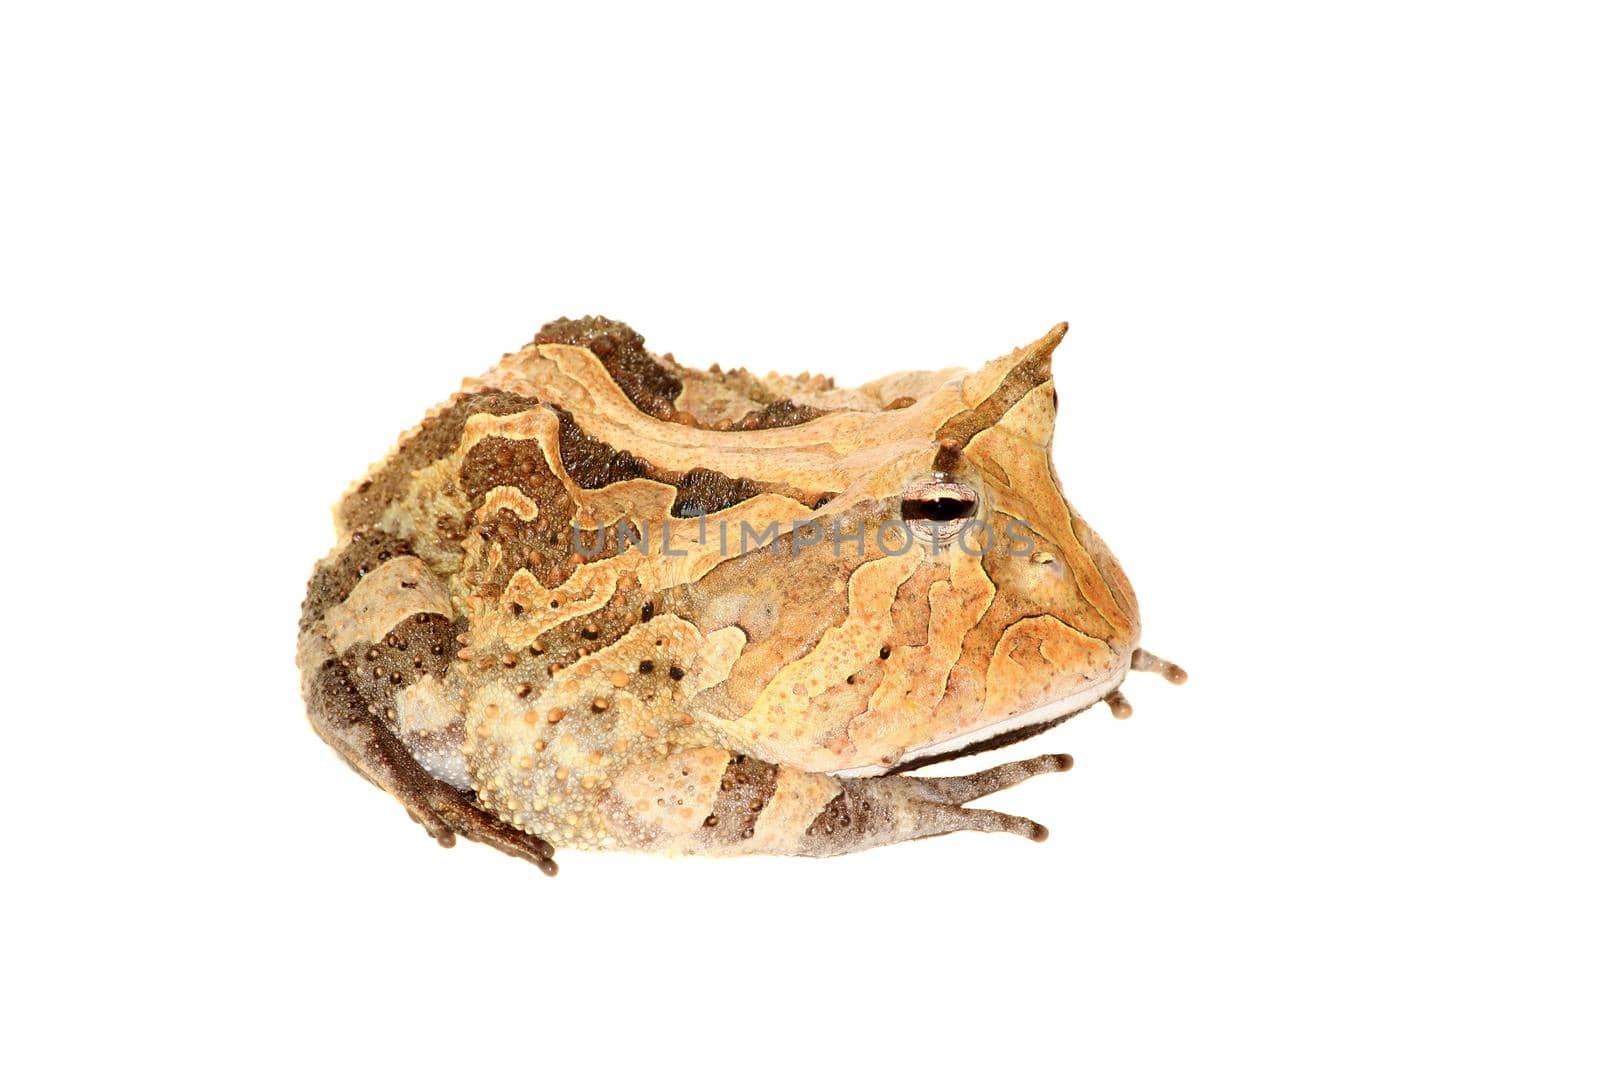 The Surinam horned frog isolated on white by RosaJay